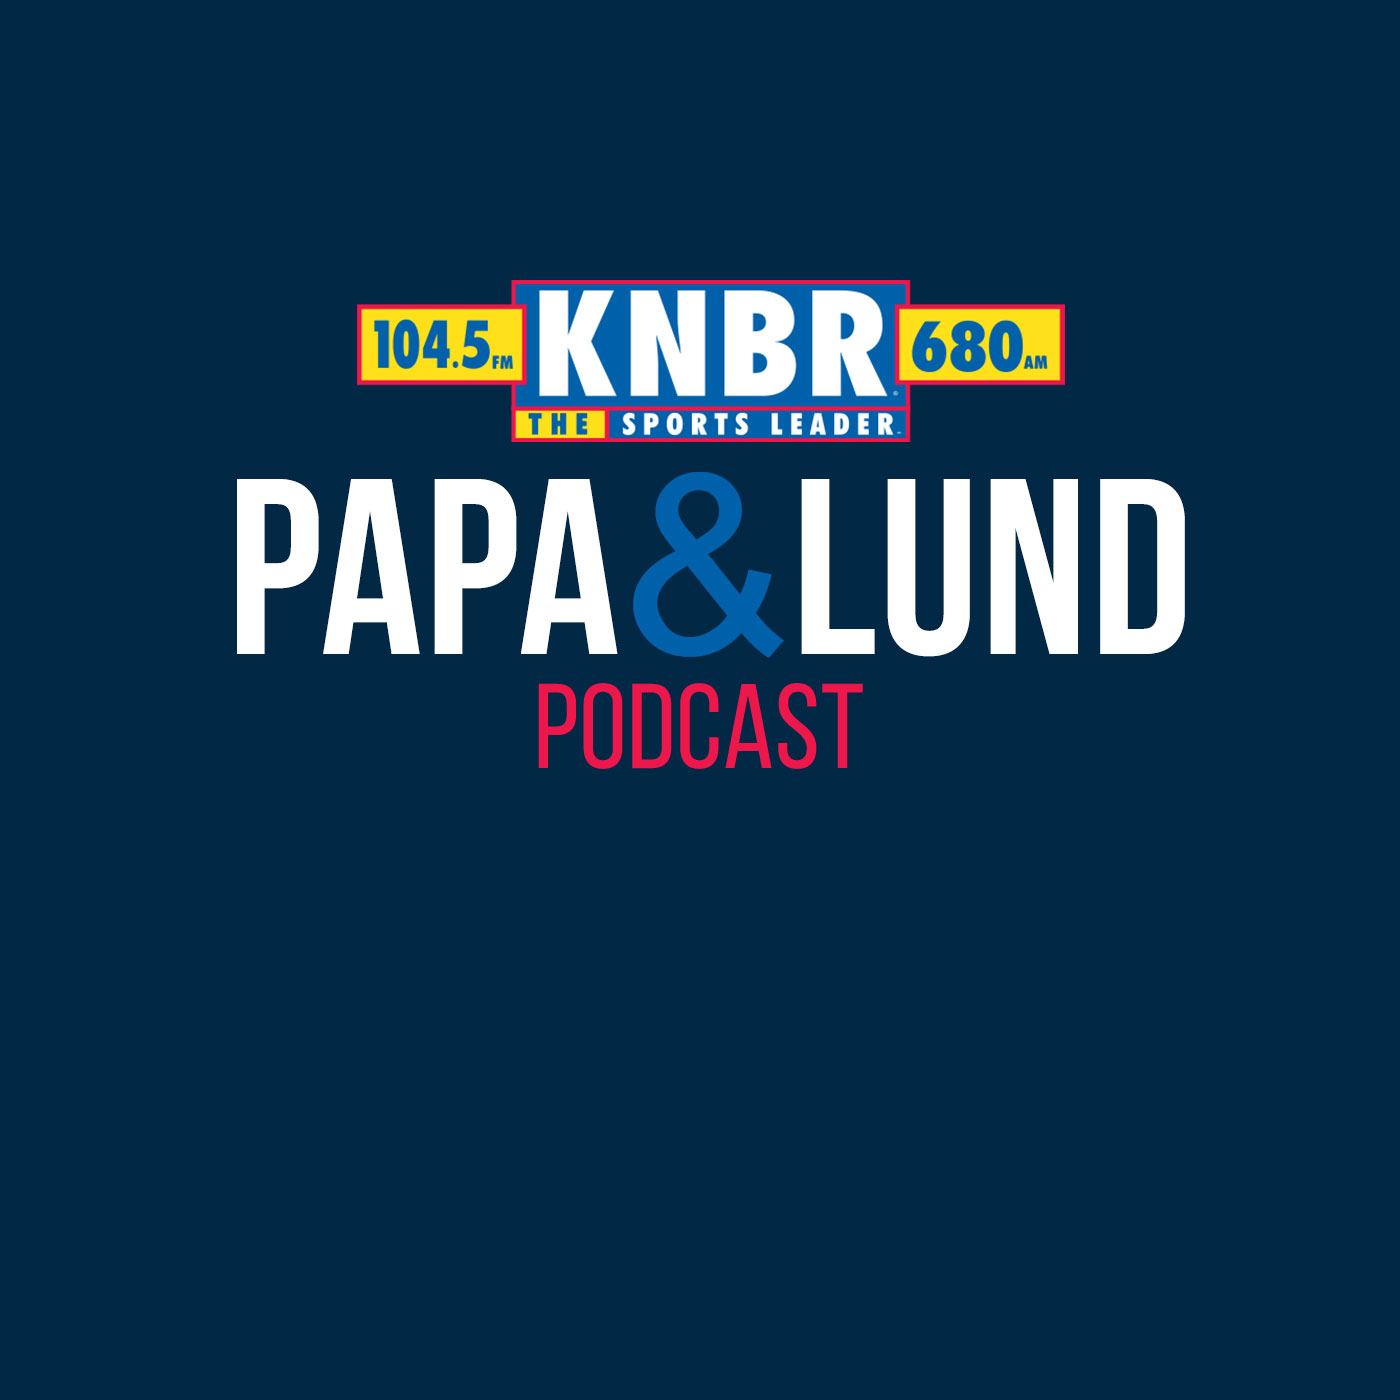 12-07 49ers Insider Matt Barrows joins Papa & Lund: The 49ers could sign another running back this week